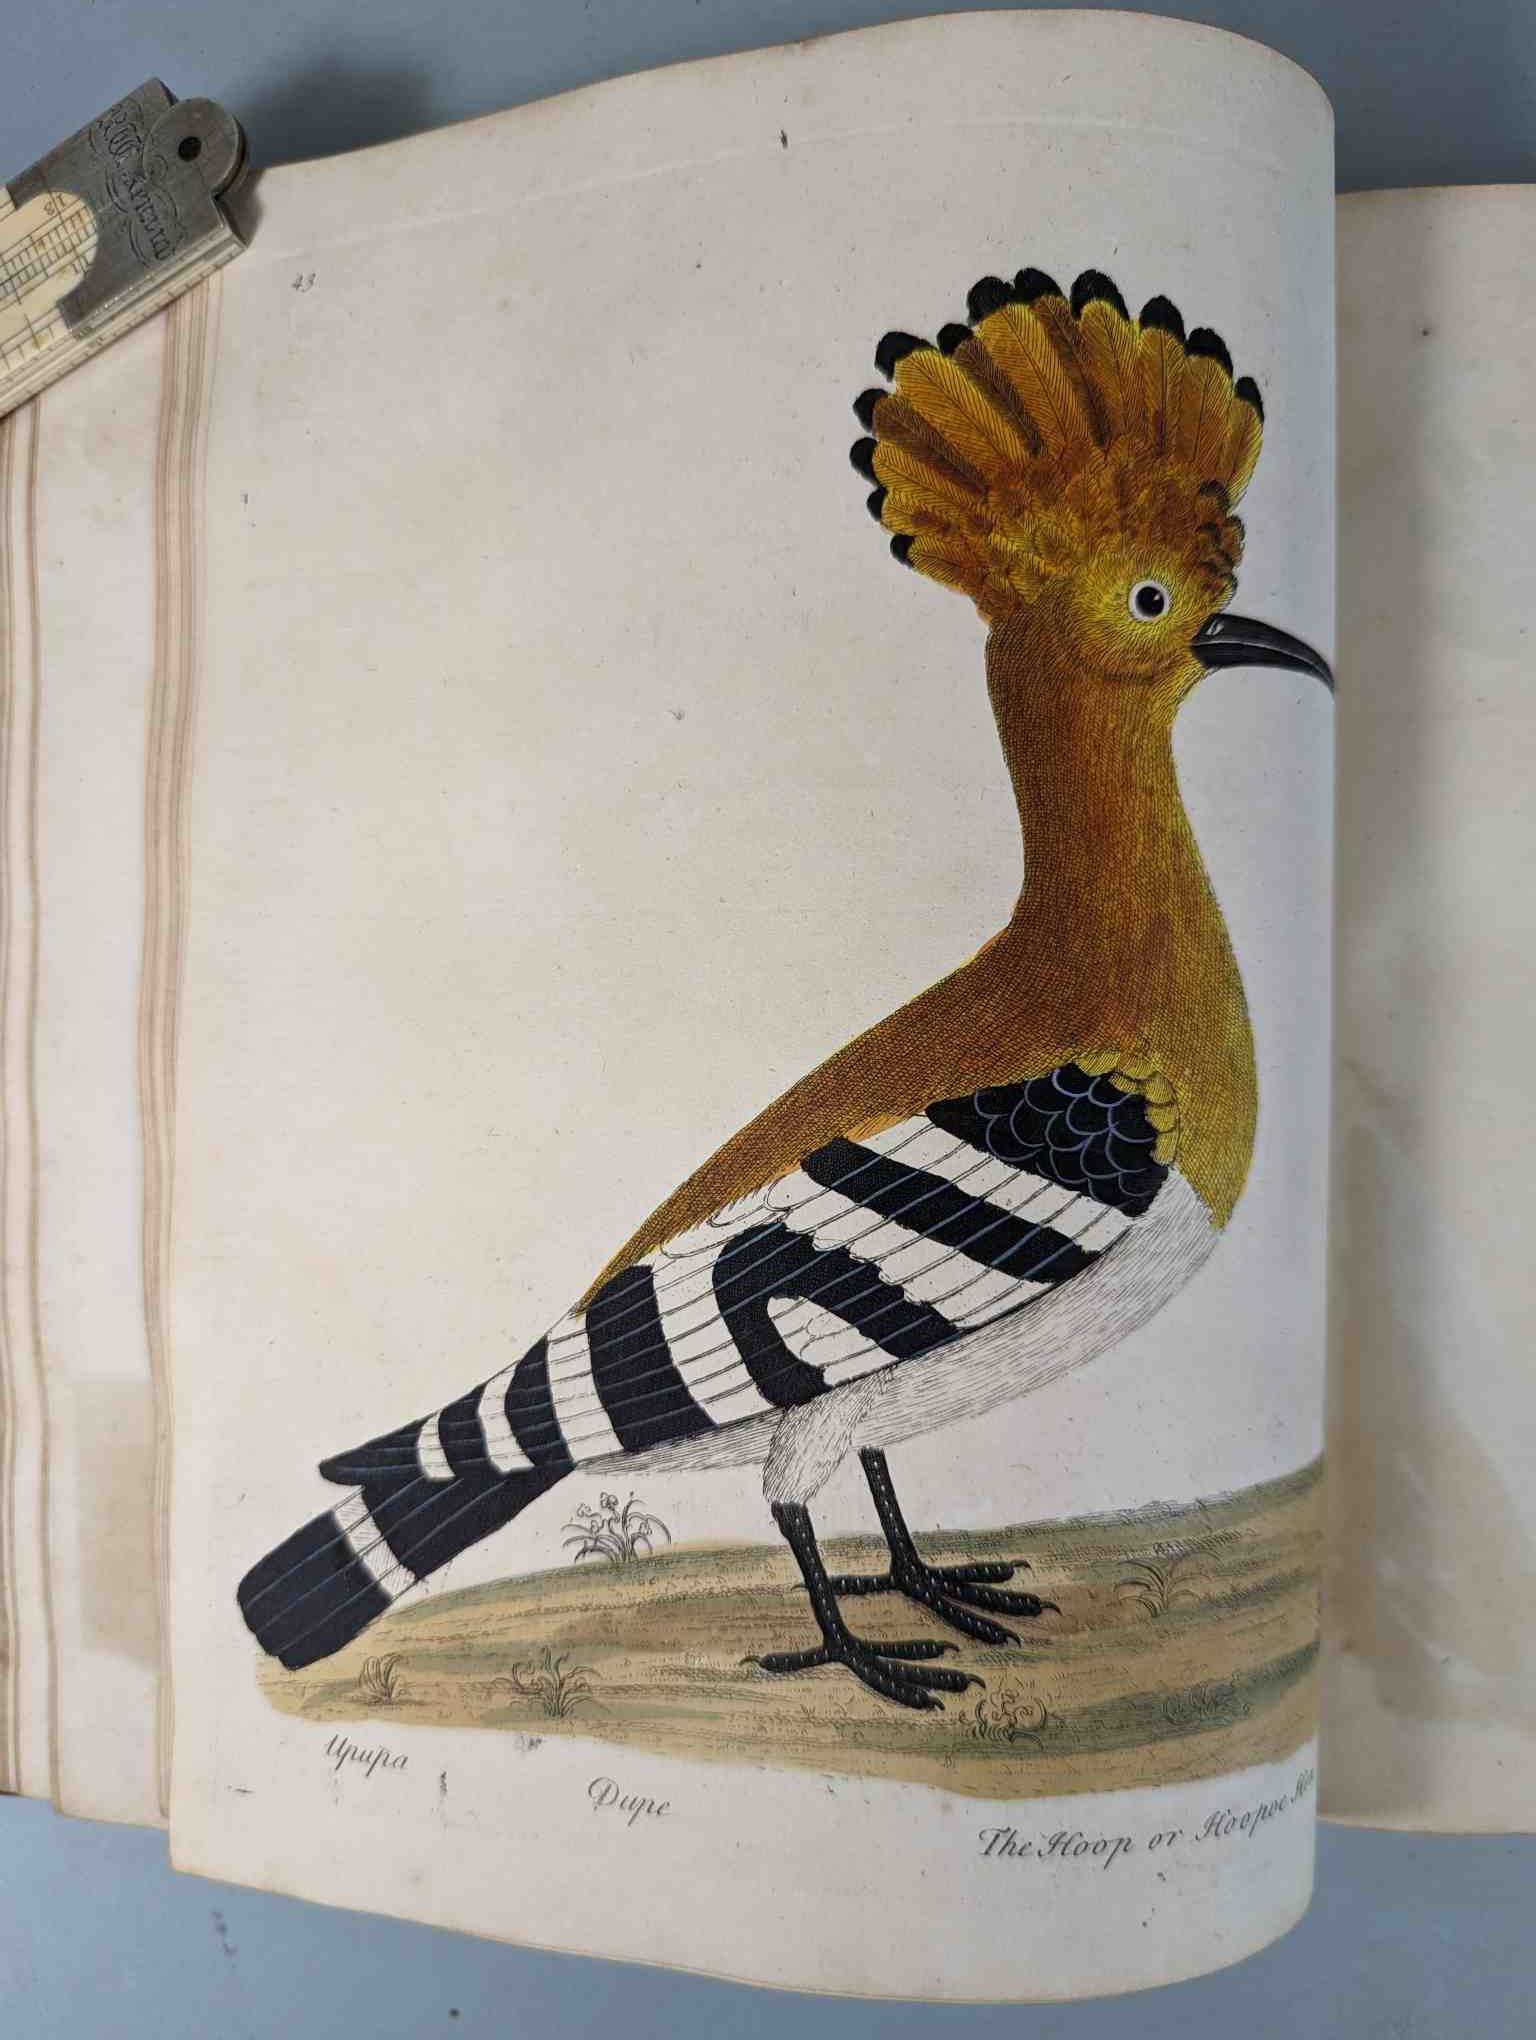 ALBIN, Eleazar. A Natural History of Birds, to which are added, Notes and Observations by W. - Image 146 of 208